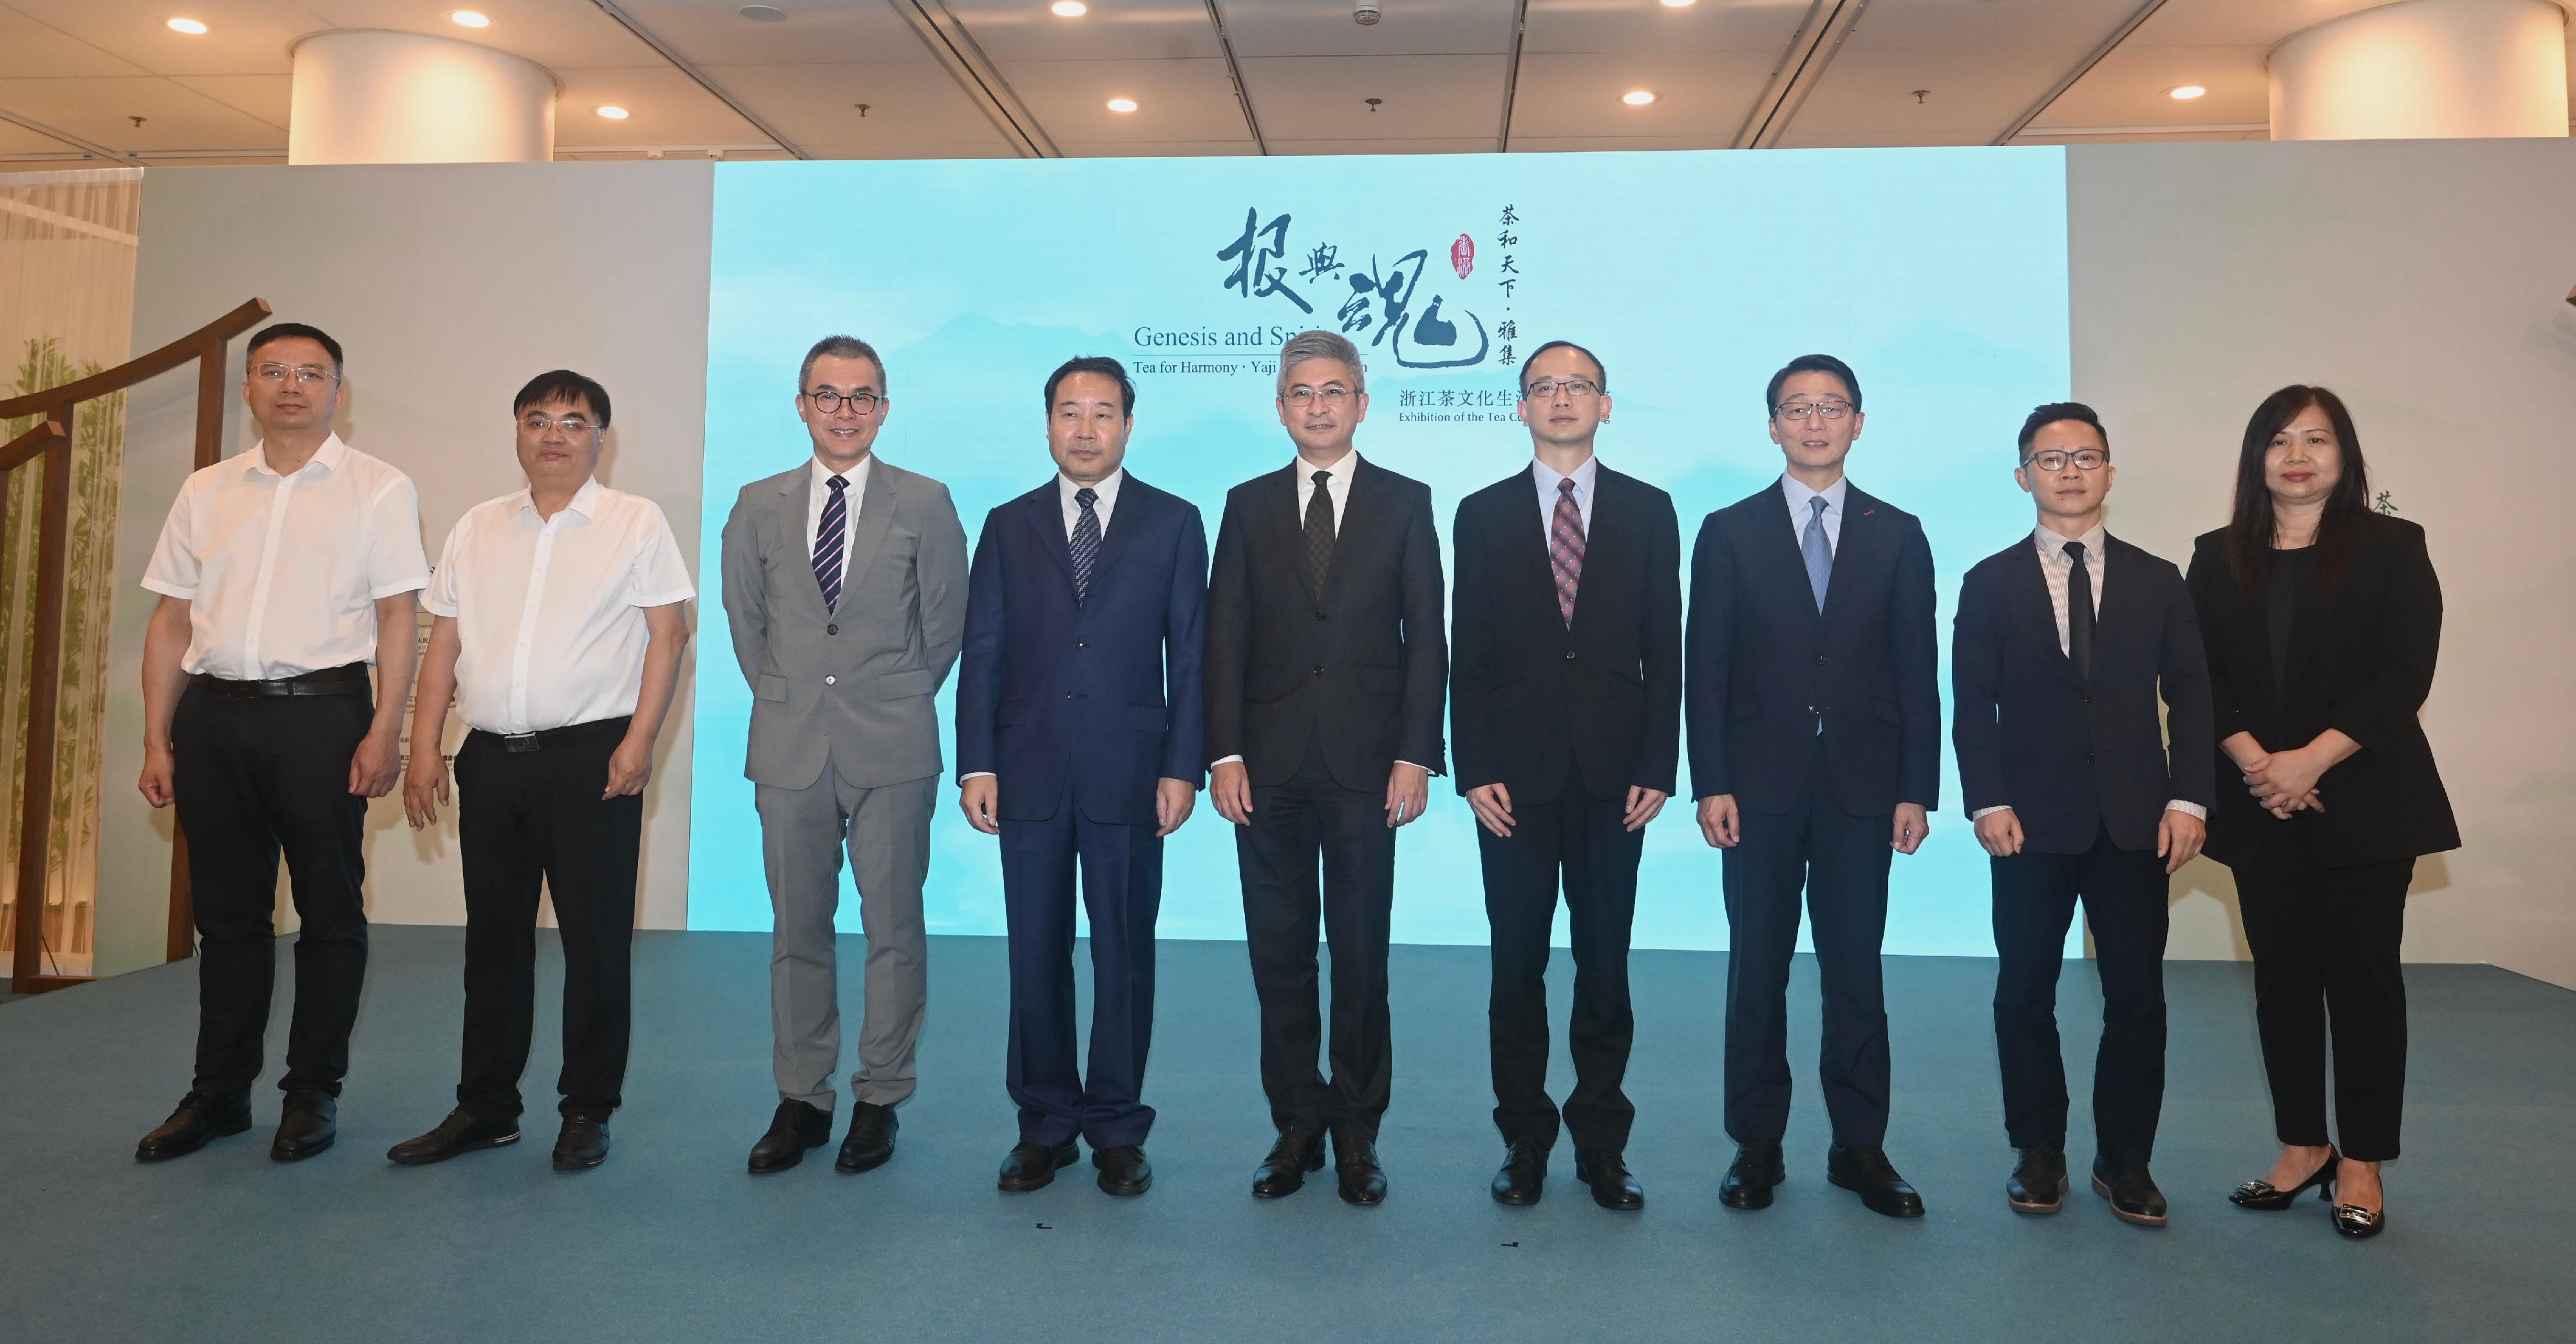 The opening ceremony for the "Genesis and Spirit - Tea for Harmony · Yaji Cultural Salon: Exhibition of the Tea Culture of Zhejiang" was held today (August 4) at the Hong Kong Central Library. Photo shows (from left) the Secretary, Deputy Director of the Zhejiang Provincial Center of Intangible Cultural Heritage Protection, Mr Wu Yanfei; Second-Grade Inspector of the Zhejiang Provincial Department of Culture and Tourism Mr Dai Yan; the Chairperson of the Intangible Cultural Heritage Advisory Committee, Professor Ricardo Mak; the Director of the Asia Tourism Exchange Center of the Ministry of Culture and Tourism, Mr Zhang Dong; the Under Secretary for Culture, Sports and Tourism, Mr Raistlin Lau; the Deputy Director-General of the Department of Publicity, Cultural and Sports Affairs of the Liaison Office of the Central People's Government in the Hong Kong Special Administrative Region, Mr Lin Nan; the Director of Leisure and Cultural Services, Mr Vincent Liu; First-Grade Consultant of the Hong Kong and Macao Affairs Division of International Cooperation and Exchange Bureau (Hong Kong, Macao and Taiwan Affairs Office) of the Ministry of Culture and Tourism Mr Wu Jun; and the Head of the Intangible Cultural Heritage Office, Ms Joyce Ho, officiating at the ceremony.